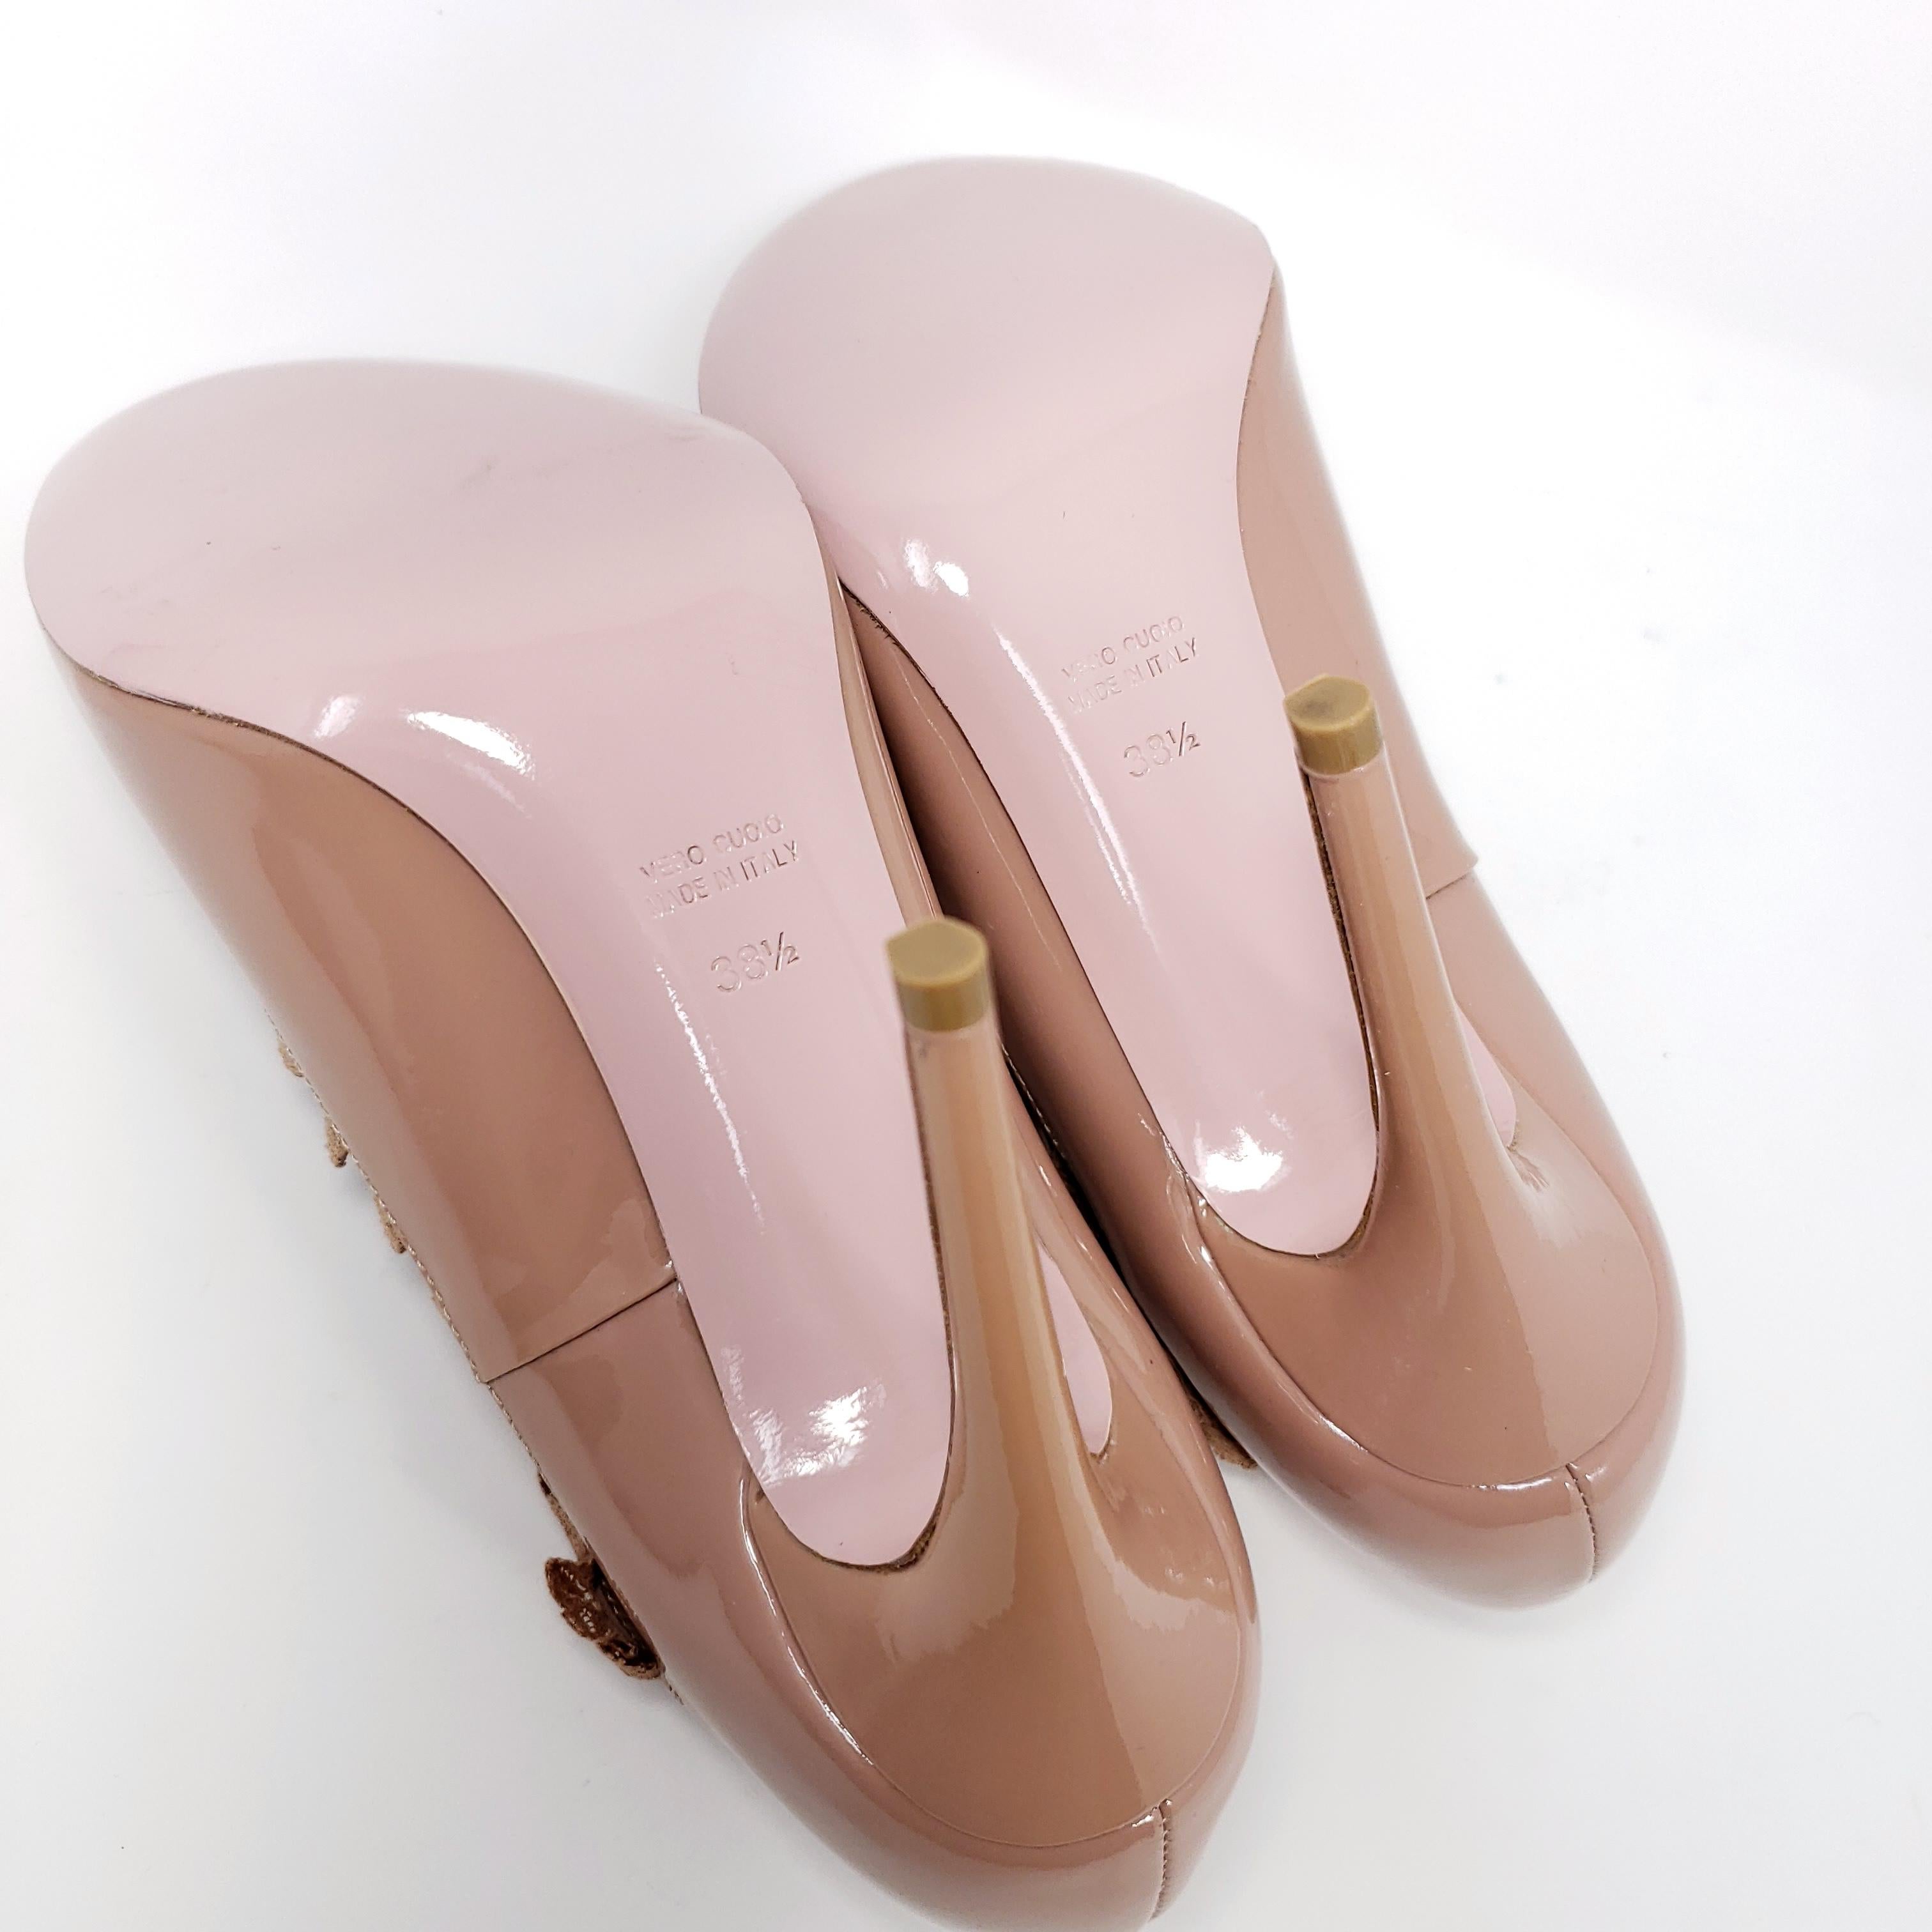 Red Valentino Slip On Stiletto Pink Leather Heels with Strap, Women's Pumps In Excellent Condition For Sale In Milford, DE